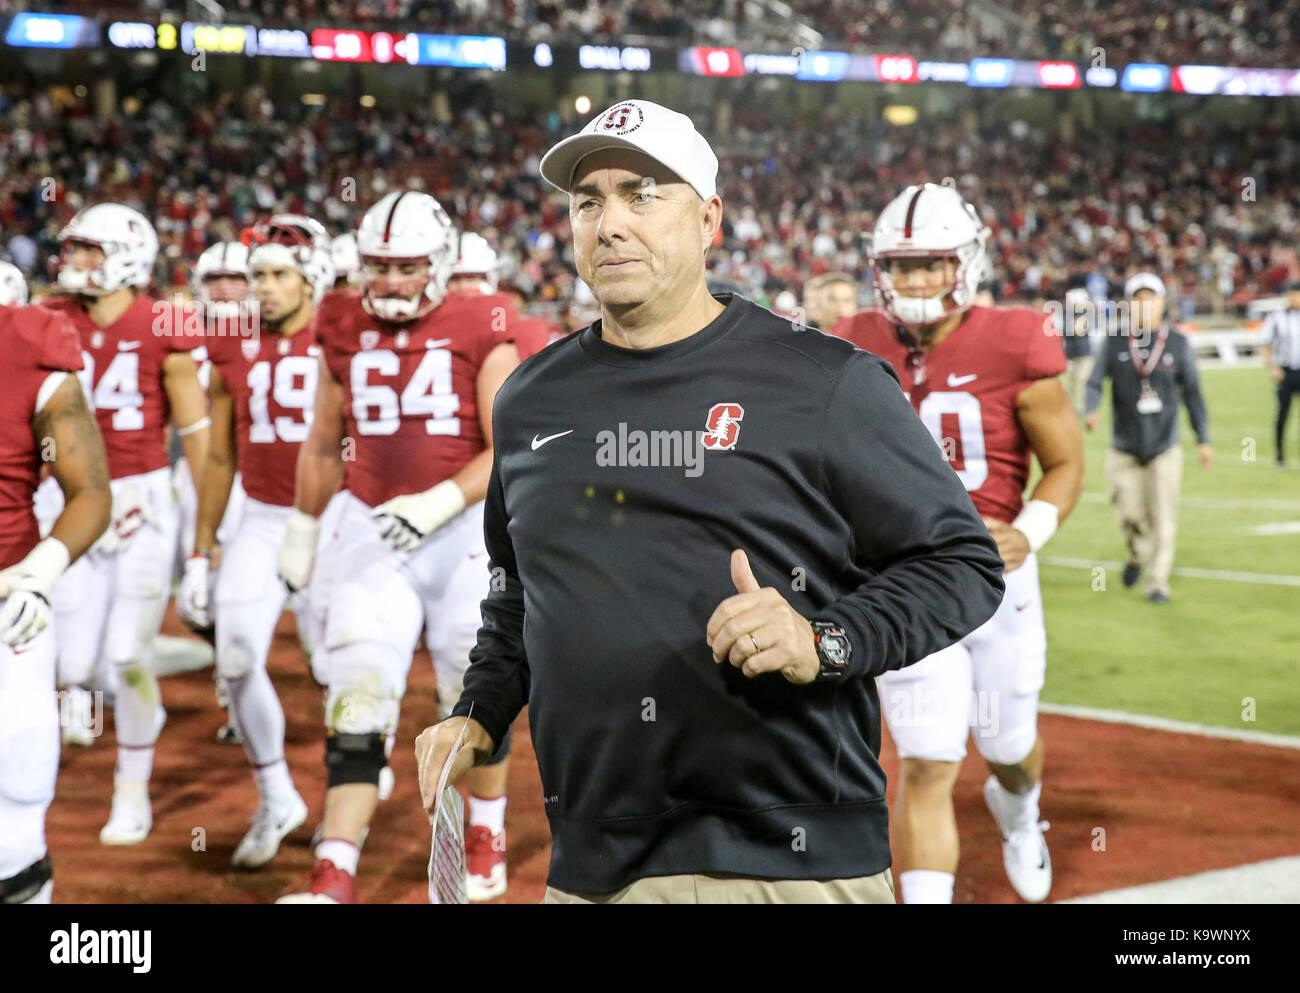 Stanford, United States. 23rd Sep, 2017. Stanford Cardinal special teams coordinator Pete Alamar runs off the field at halftime against the UCLA Bruins in a NCAA football game in Stanford, Calif. on Saturday, September 23, 2017. Stanford defeated UCLA 58-34. (Spencer Allen/Image of Sport) Photo via Credit: Newscom/Alamy Live News Stock Photo